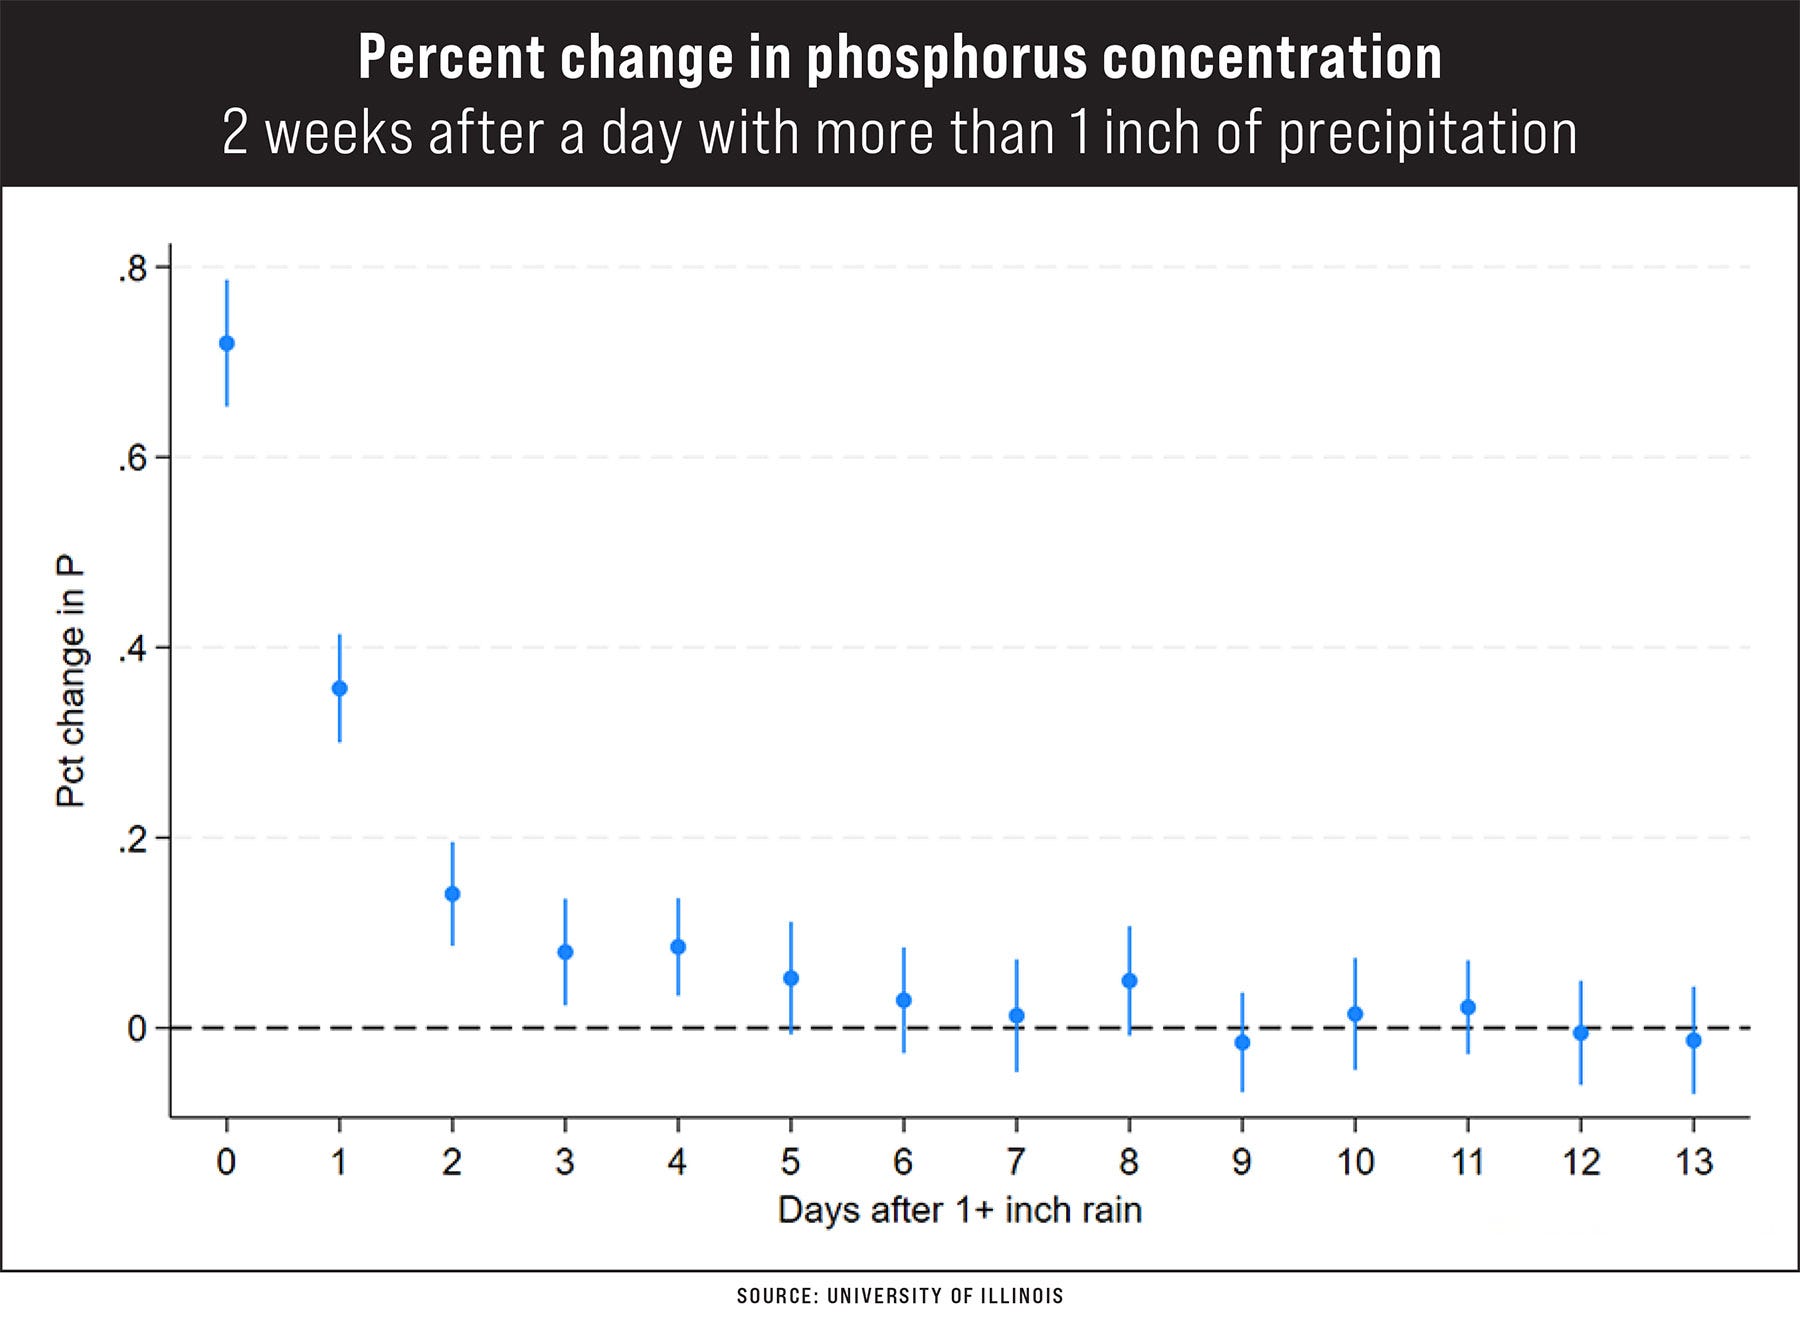 A graph showcasingpercent change in phosphorus concentration 2 weeks after a day with more than 1 inch of precipitation